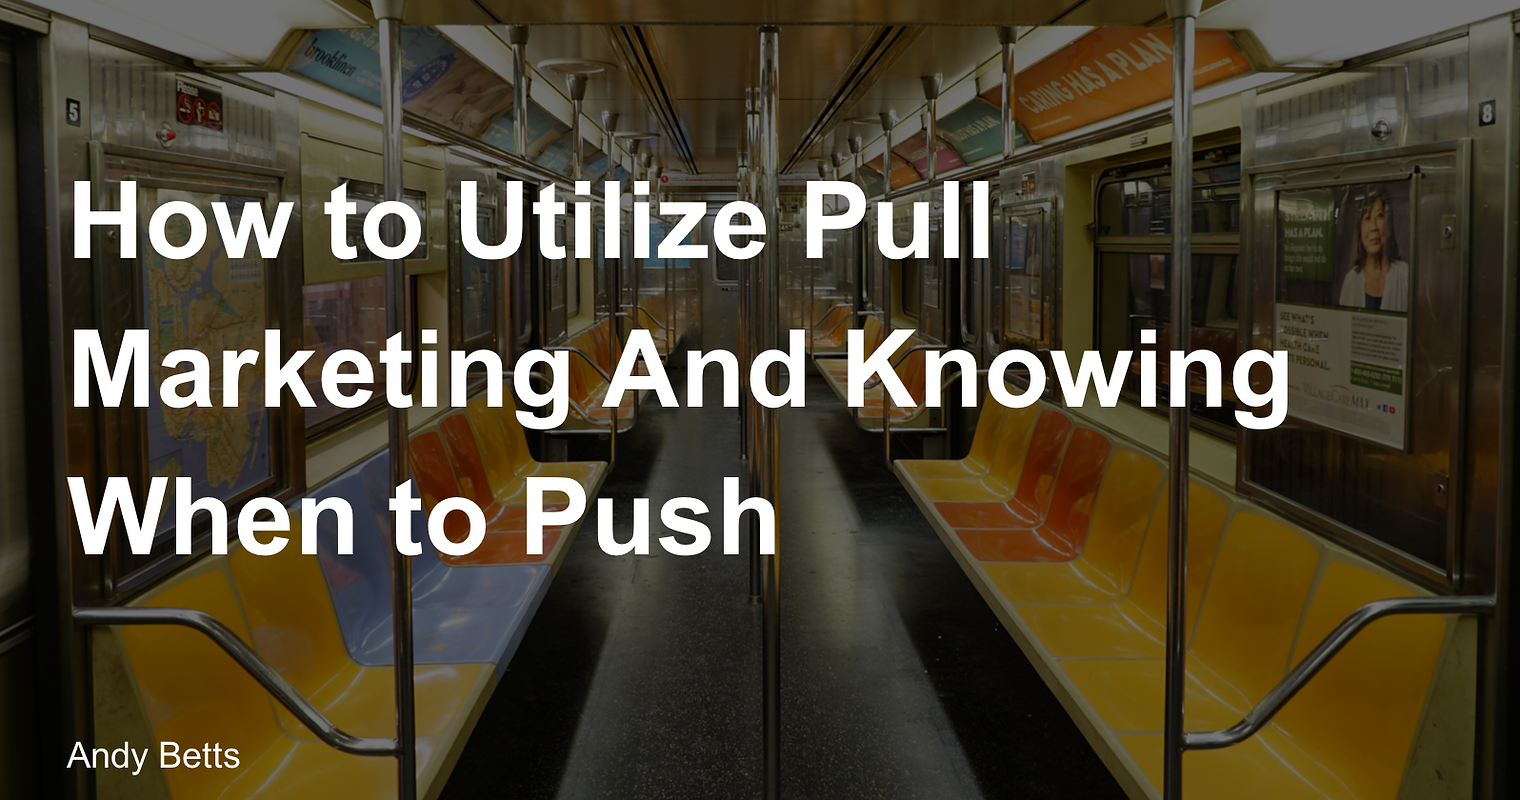 How to Use Pull Marketing & Knowing When to Push